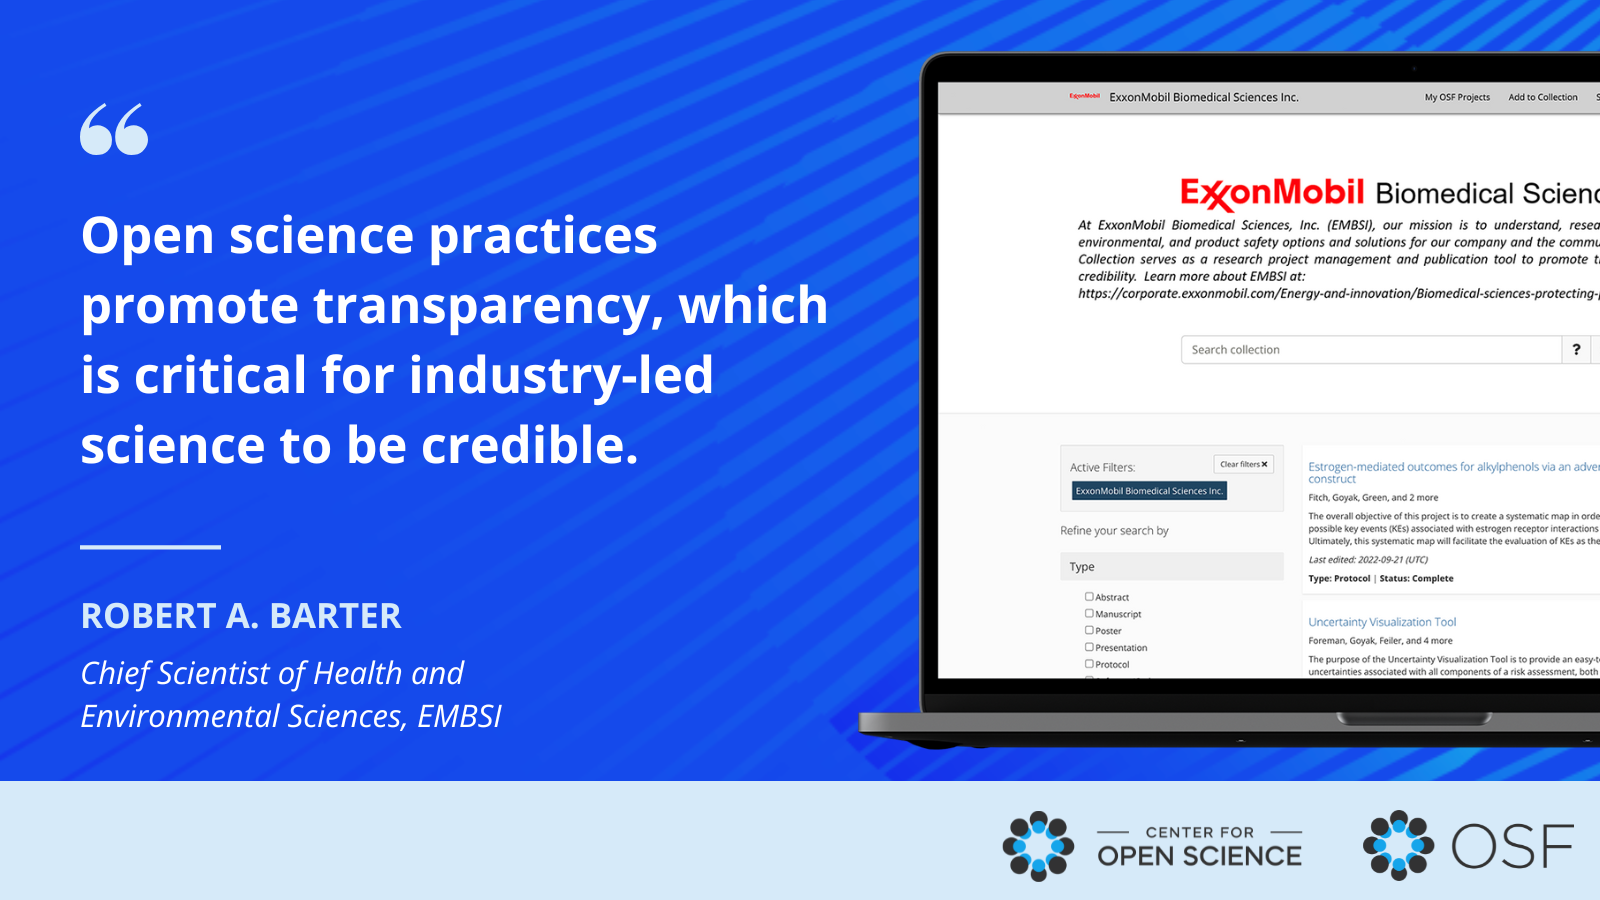 Image of ExxonMobil OSF Collection with quote "Open science practices promote transparency, which is critical for industry-led science to be credible"